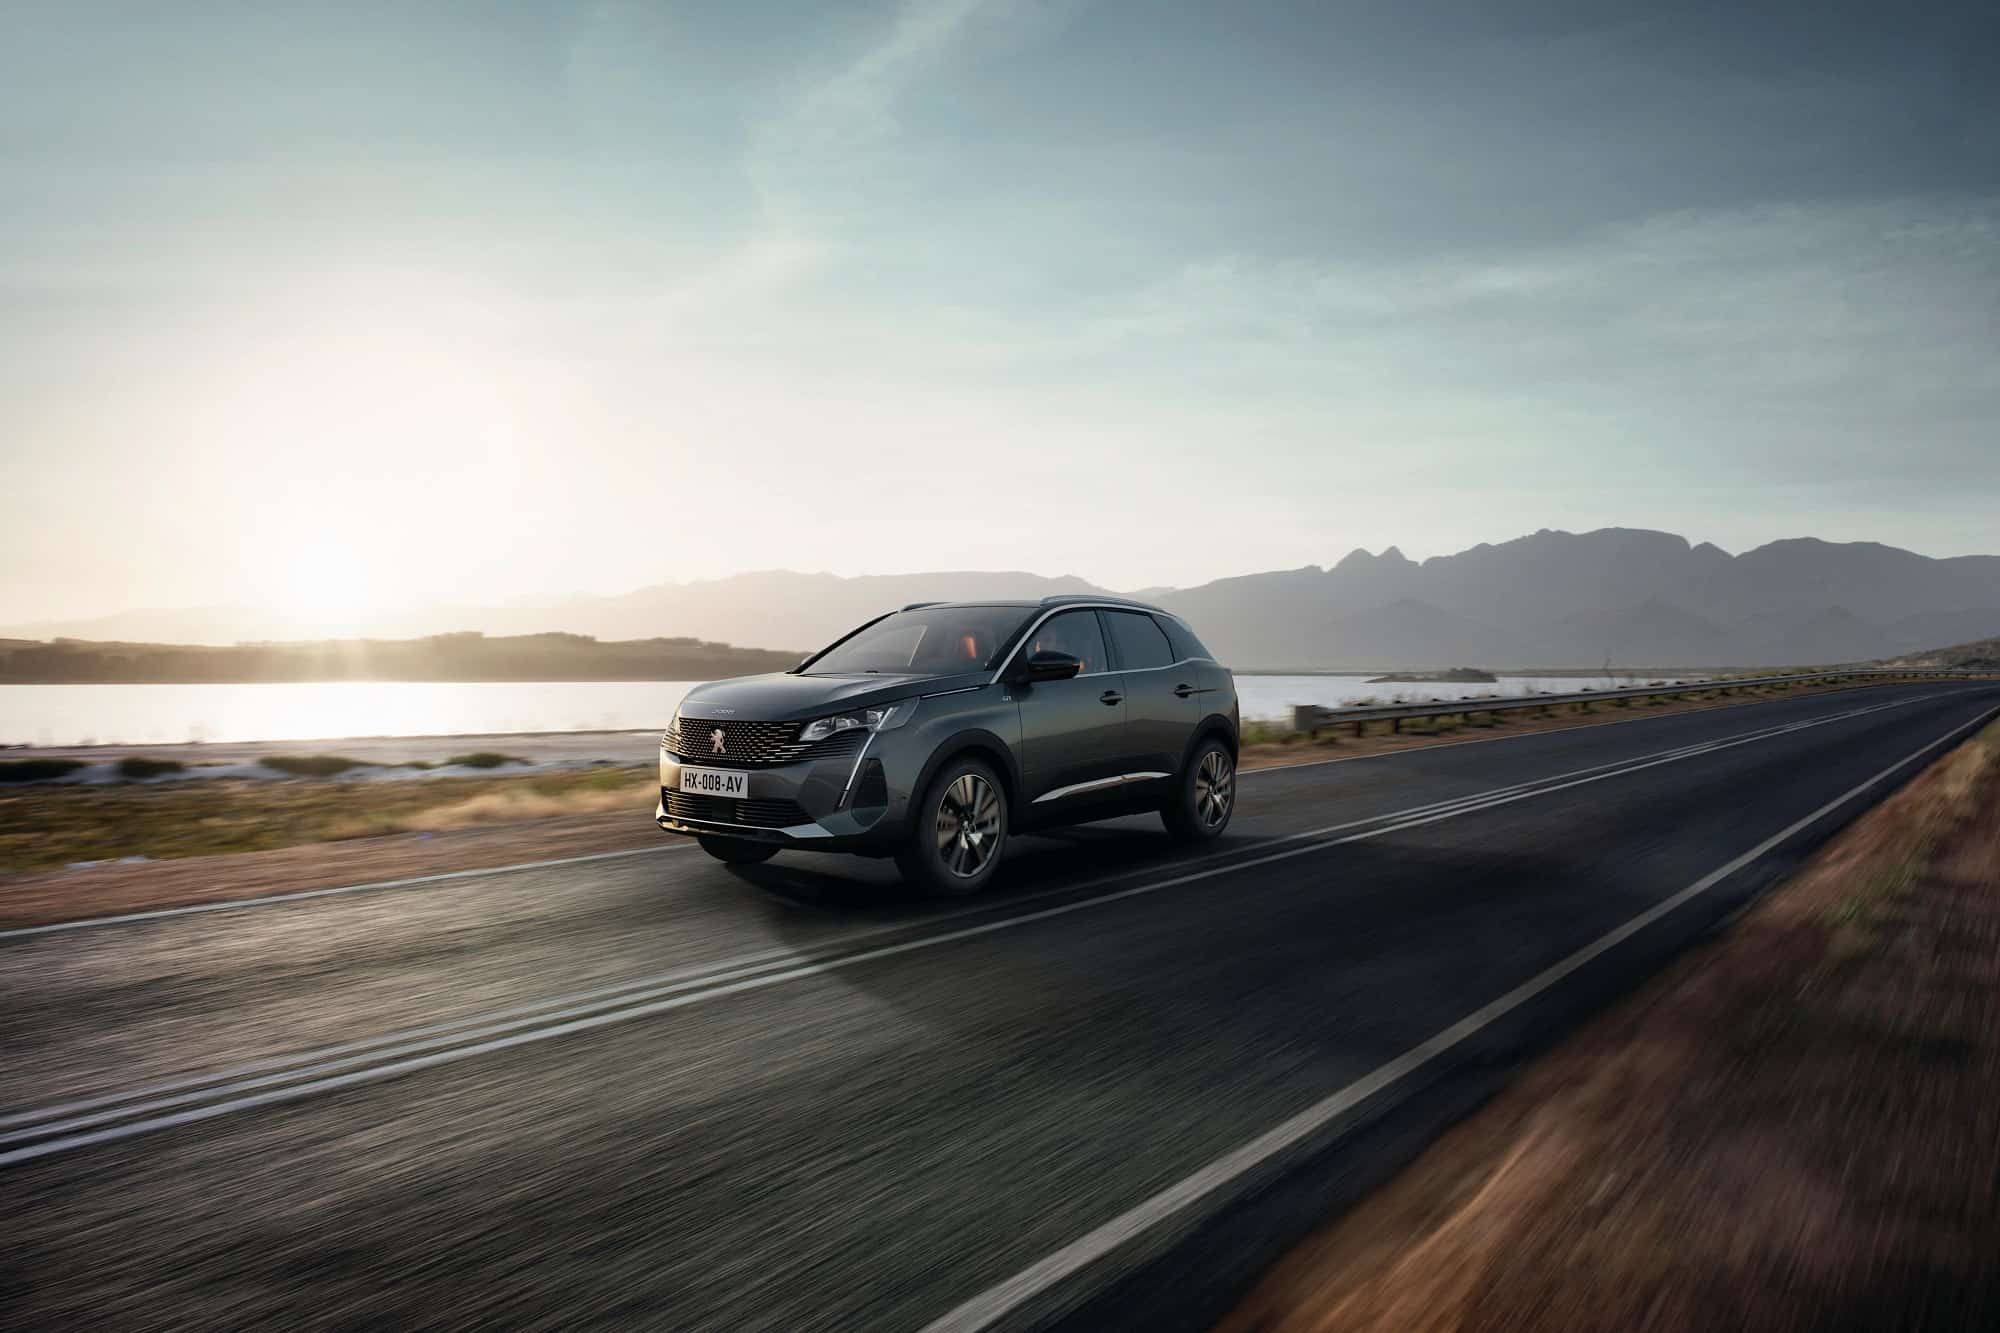 PEUGEOT unveils the All New 3008 SUV